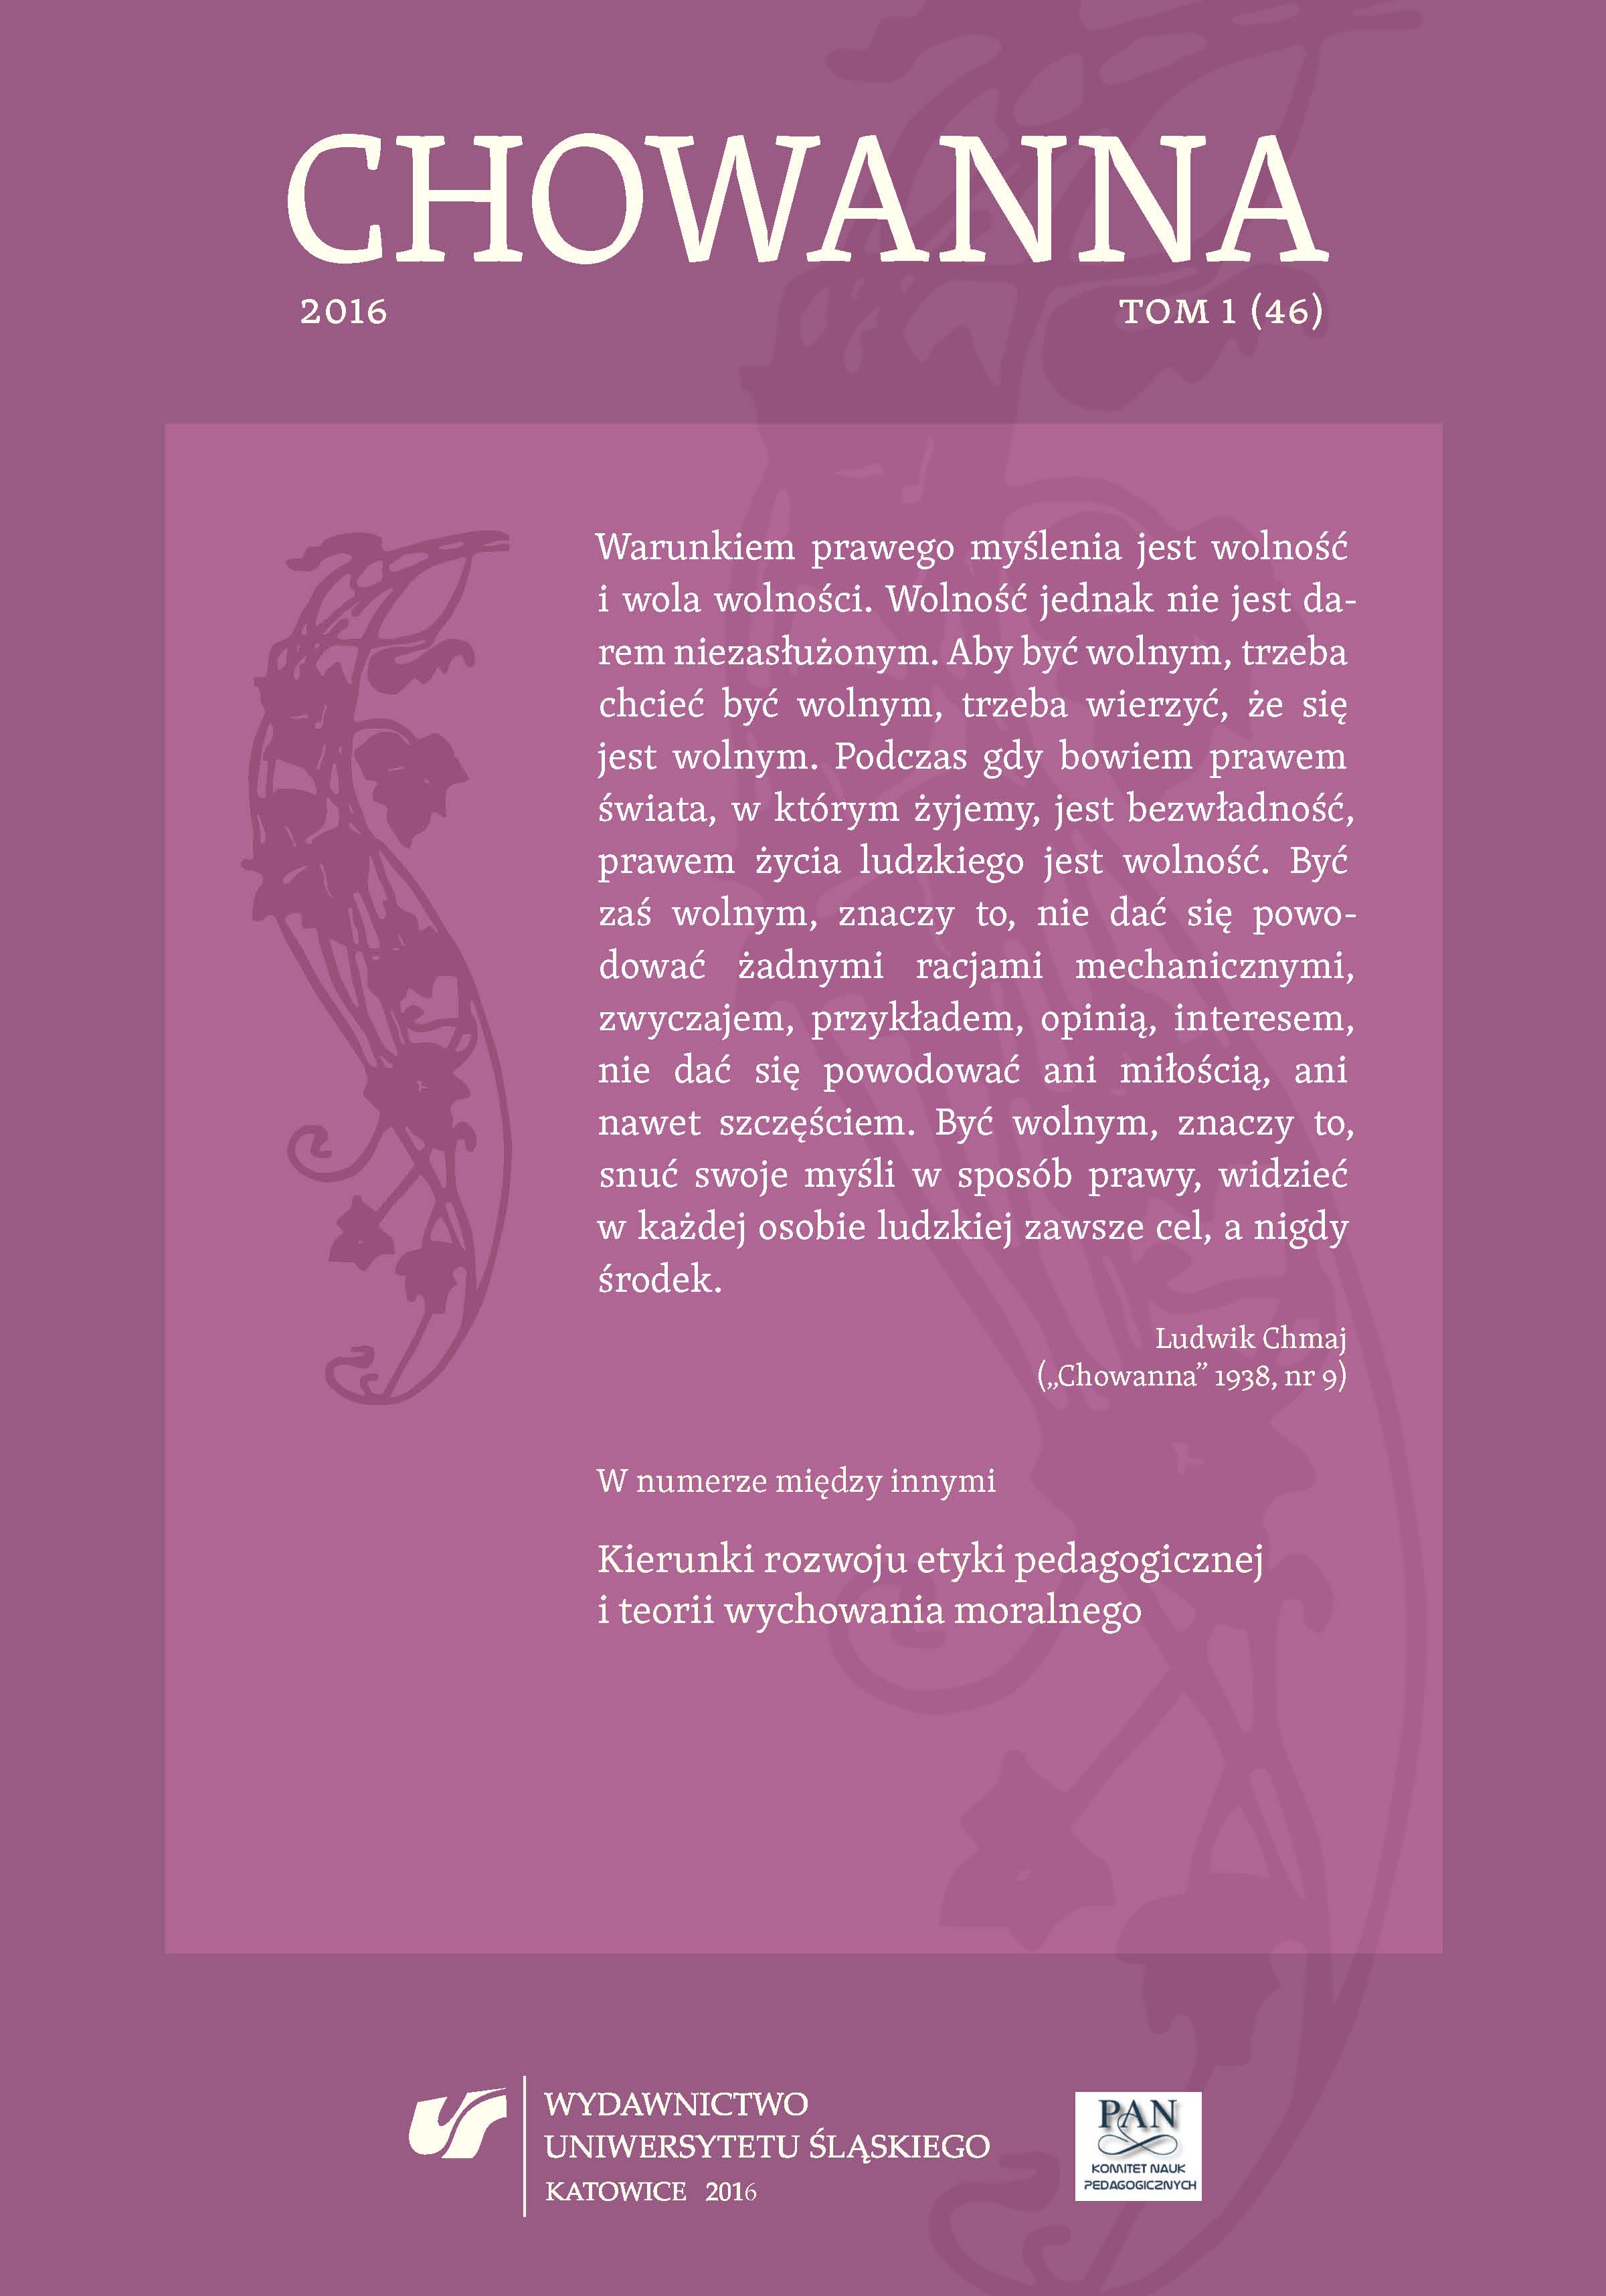 Monographic Part. Developmental Directions of Pedagogical Ethic and Theory of Moral Education (edited by Alicja Żywczok): The Ethical Dilemma Connected with Social Changes in Gender Roles Cover Image